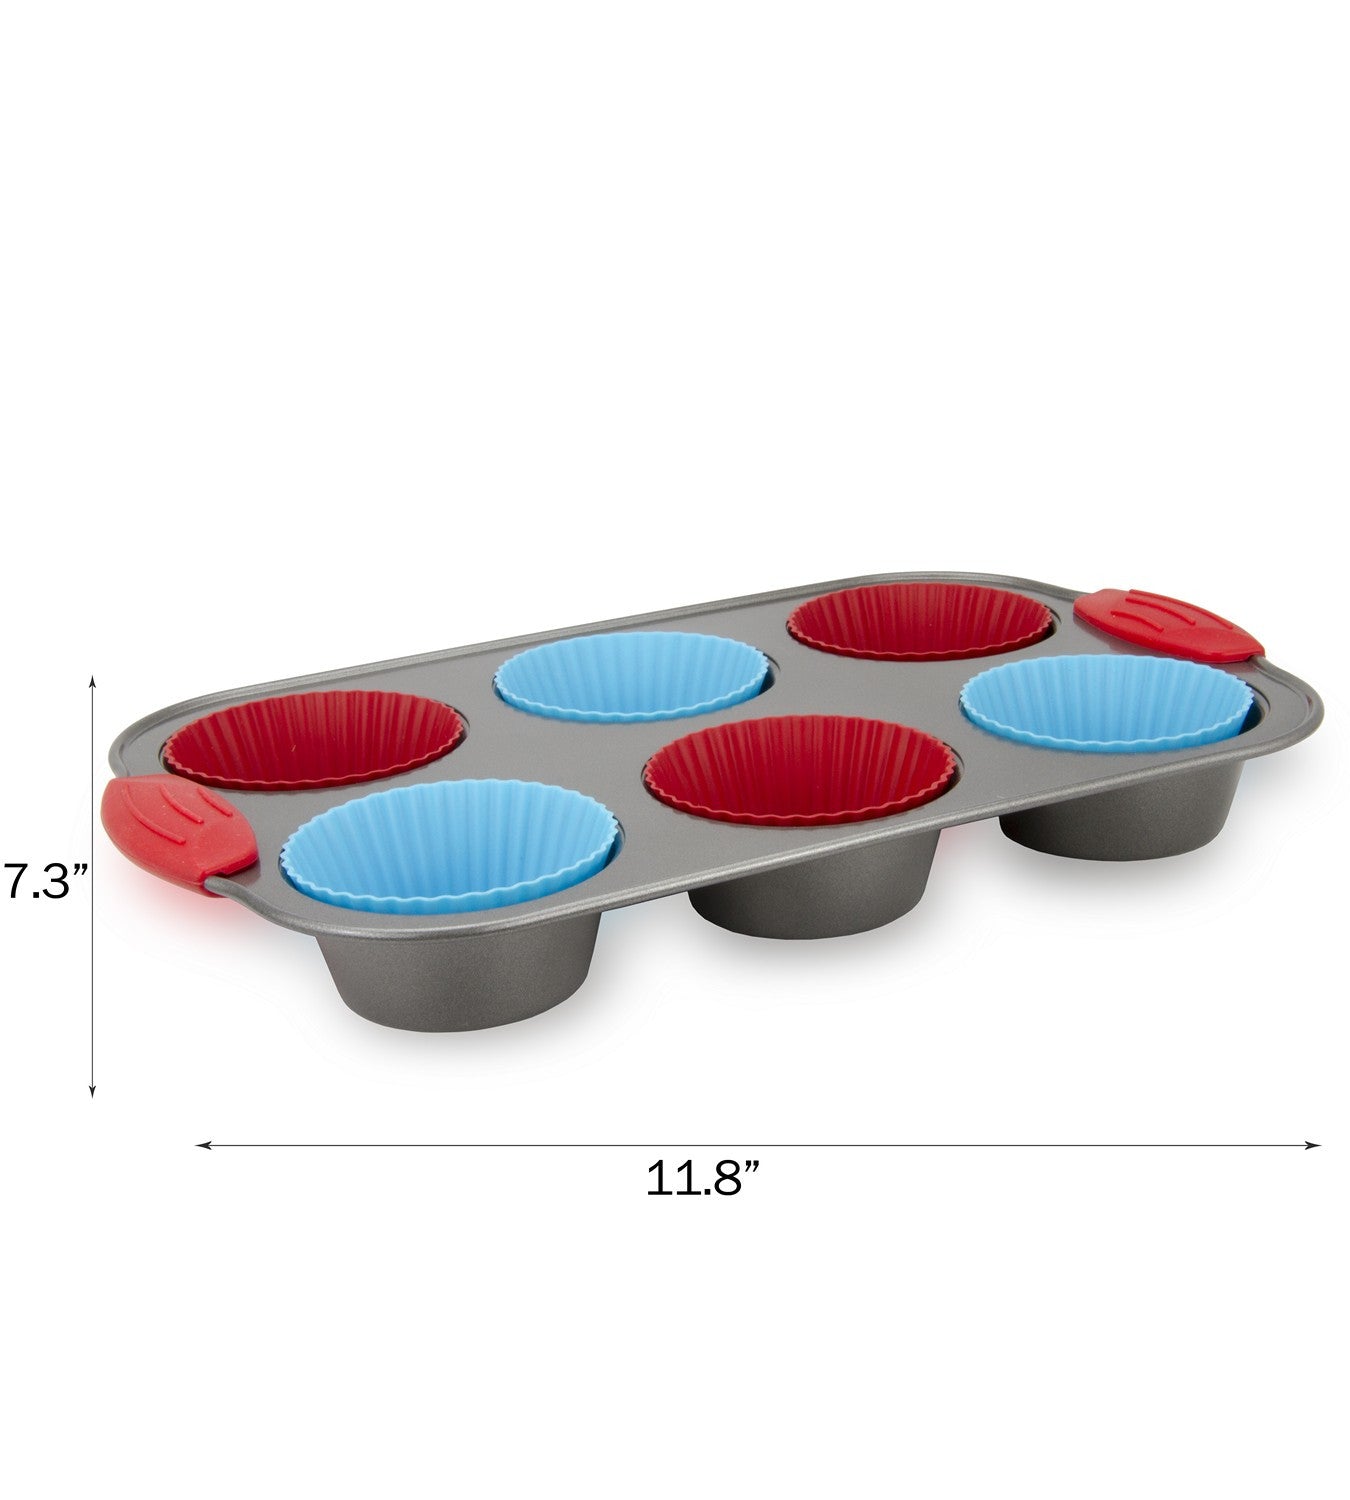 Elesinsoz 2 Pcs Muffin Top Pan with Lid, 3.6 Inch Non-Stick 6 Cup Straight  Cupcake Pan Muffin Pans Come with 10pcs Bread Bags with Ties, Hamburger Bun  Pan for Home/Kitchen Baking 